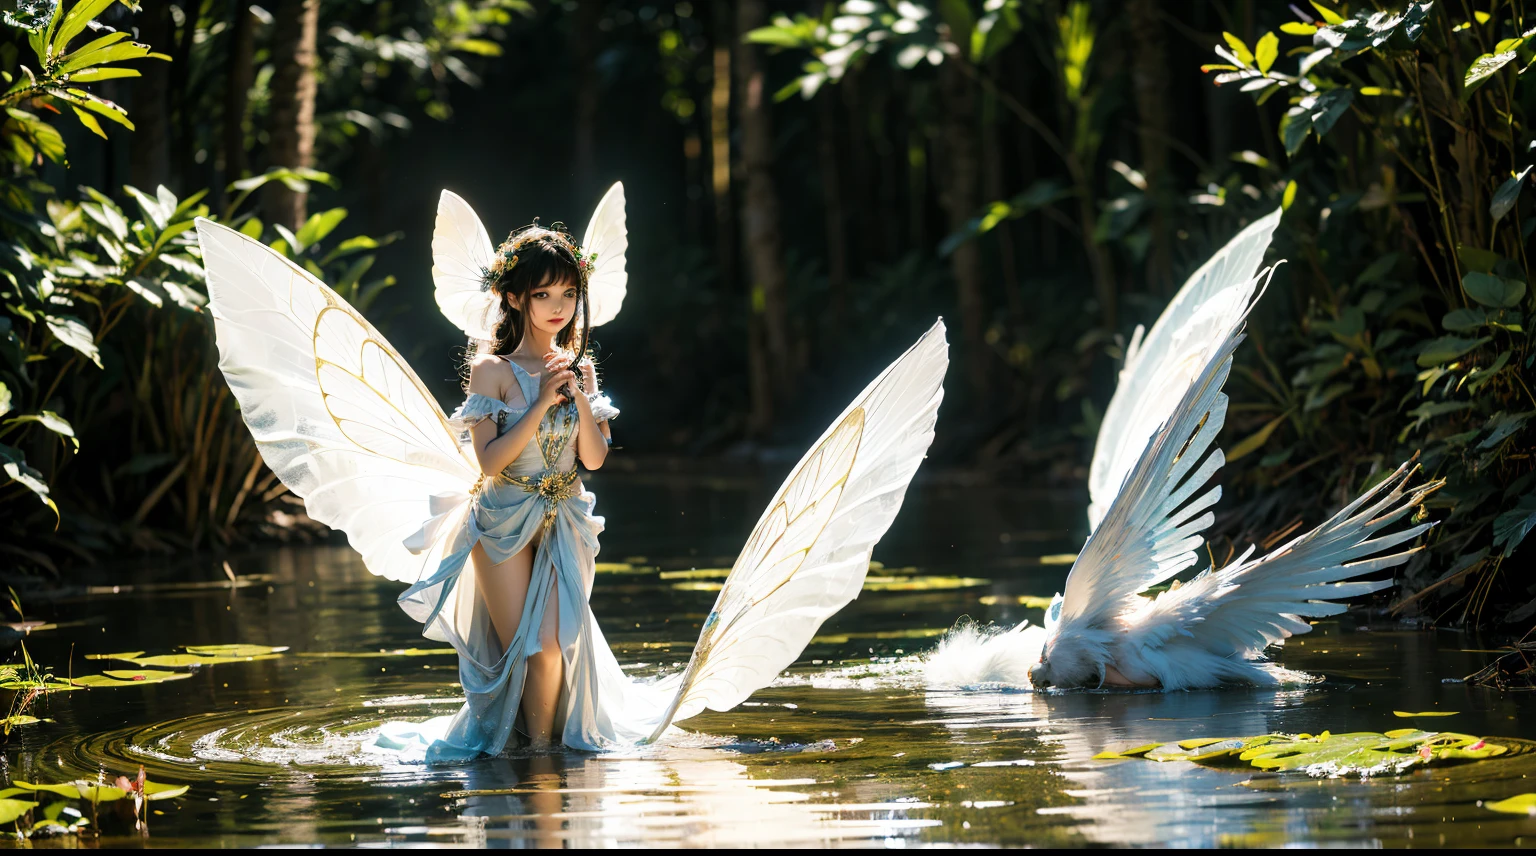 "Charming &quot;Flower Fairy&quot; depicted in pristine and magical woodlands，pond near waterfall, Delicate and vibrant flowers adorned her flowing gown. Fairies have otherworldly beauty，Has ethereal wings, Her graceful posture exudes wonder and magic. Make colors come alive，Create a vivid and dreamy atmosphere, Bathed in soft sunlight and sparkling pollen grains. Create a masterpiece，Capturing the essence of nature’s charm and the mysterious presence of the “Flower Fairy”."